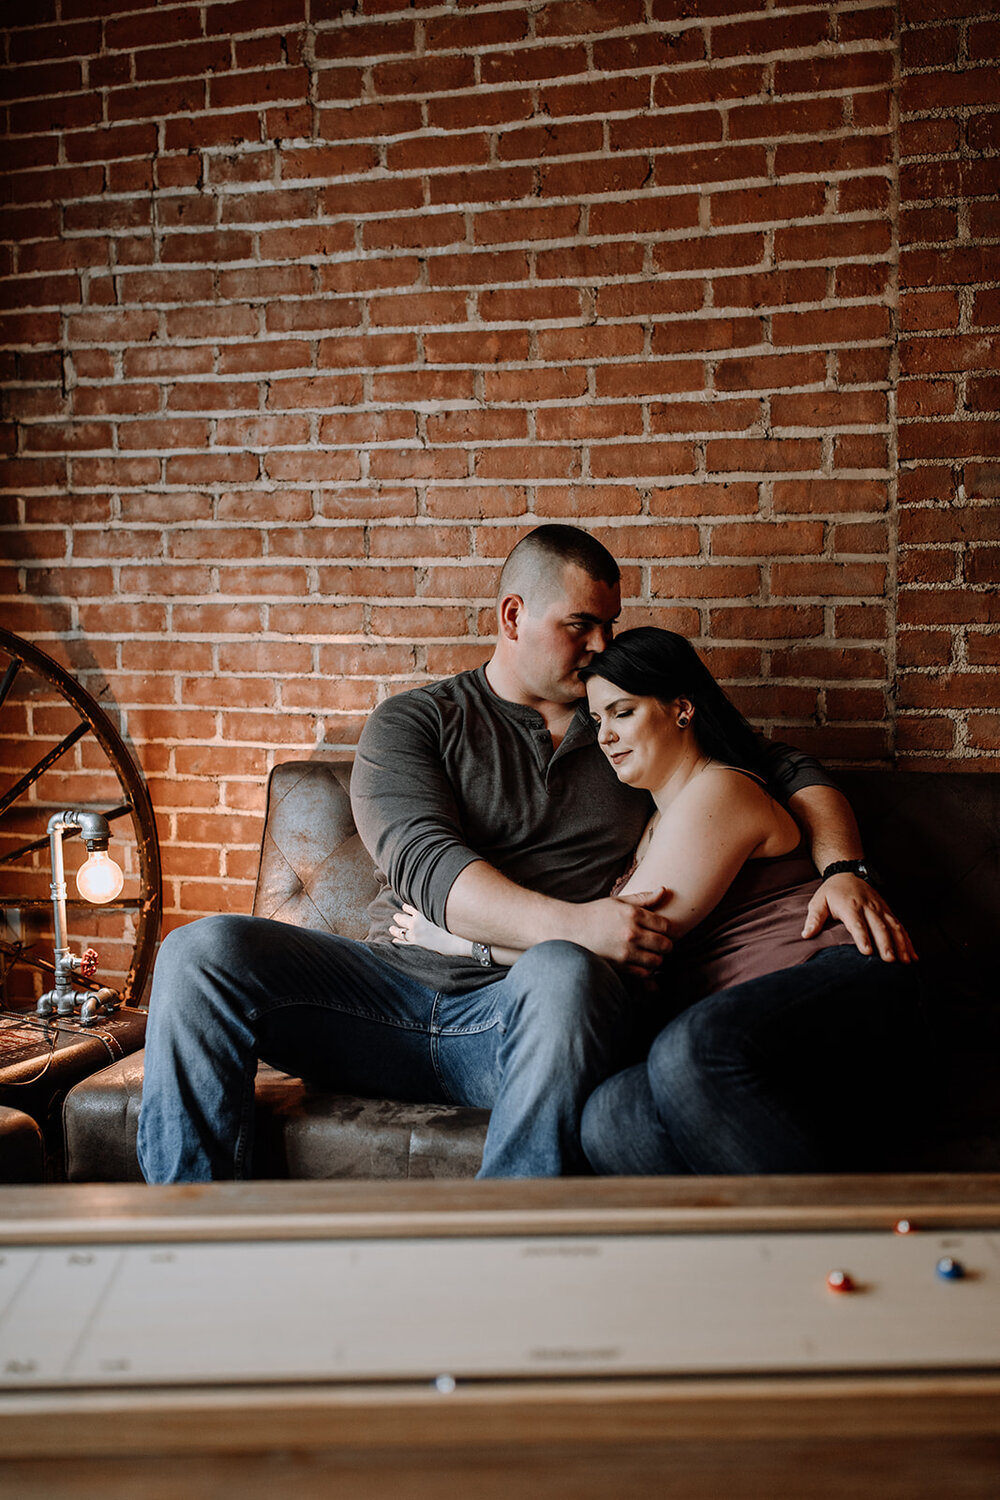 notch-eight-craft-house-jim-thorpe-engagement-pictures-4